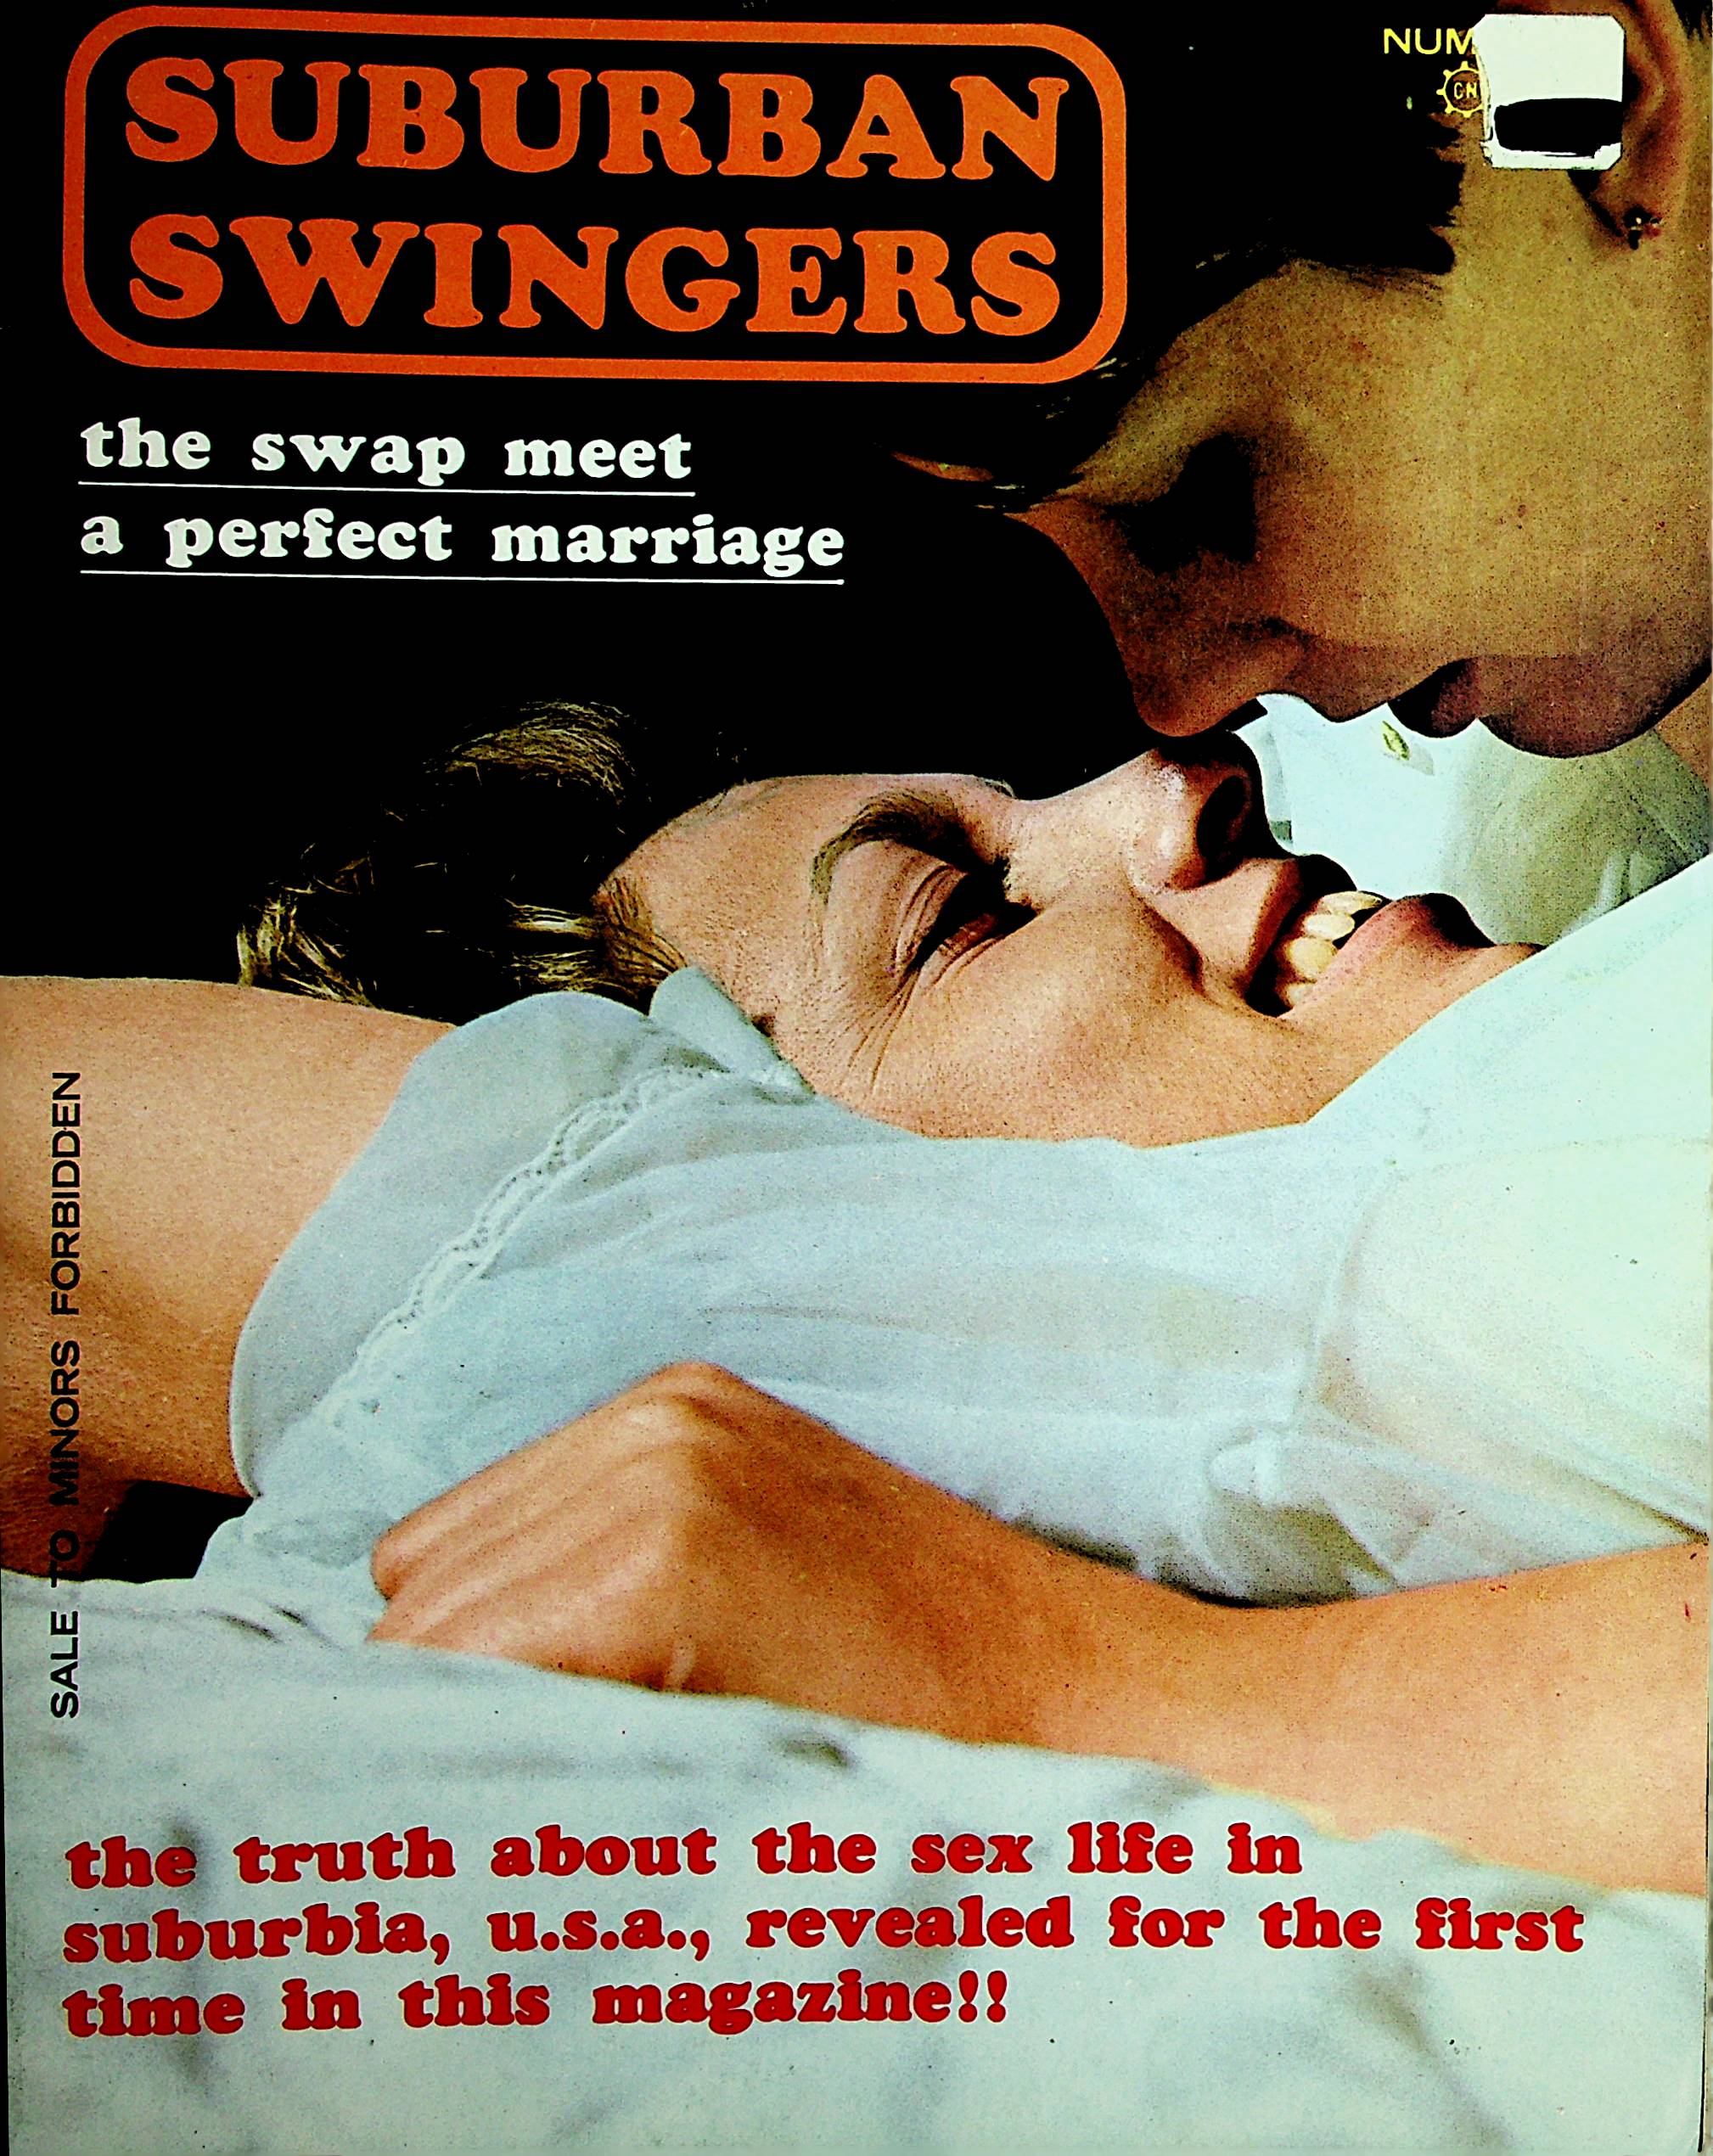 Suburban Swingers Magazine The Swap Meet A Perfect Marriage #1 1969 Pr picture